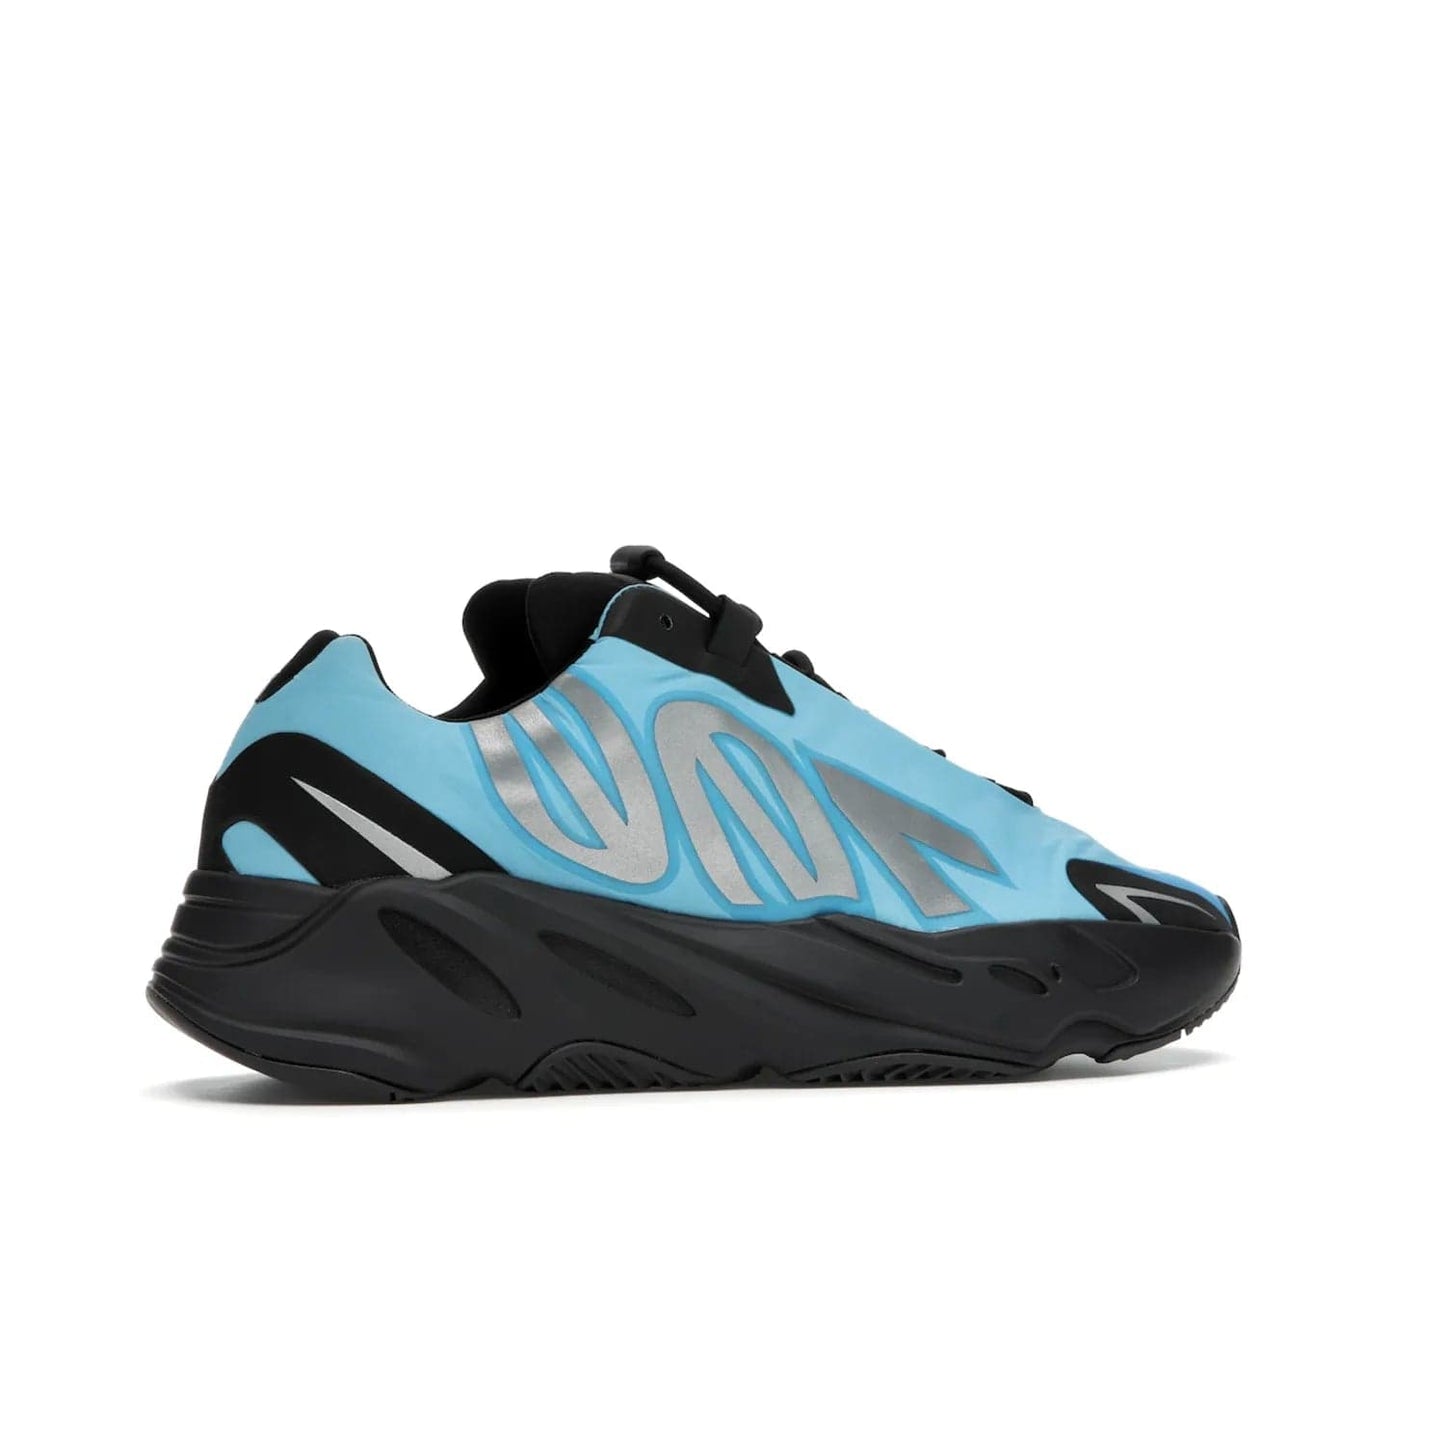 adidas Yeezy Boost 700 MNVN Bright Cyan - Image 35 - Only at www.BallersClubKickz.com - The adidas Yeezy Boost 700 MNVN features a Bright Cyan nylon upper with iconic "700" graphics and a sculptural black Boost sole for superior style and comfort. Step into legendary style and comfort in June 2021.